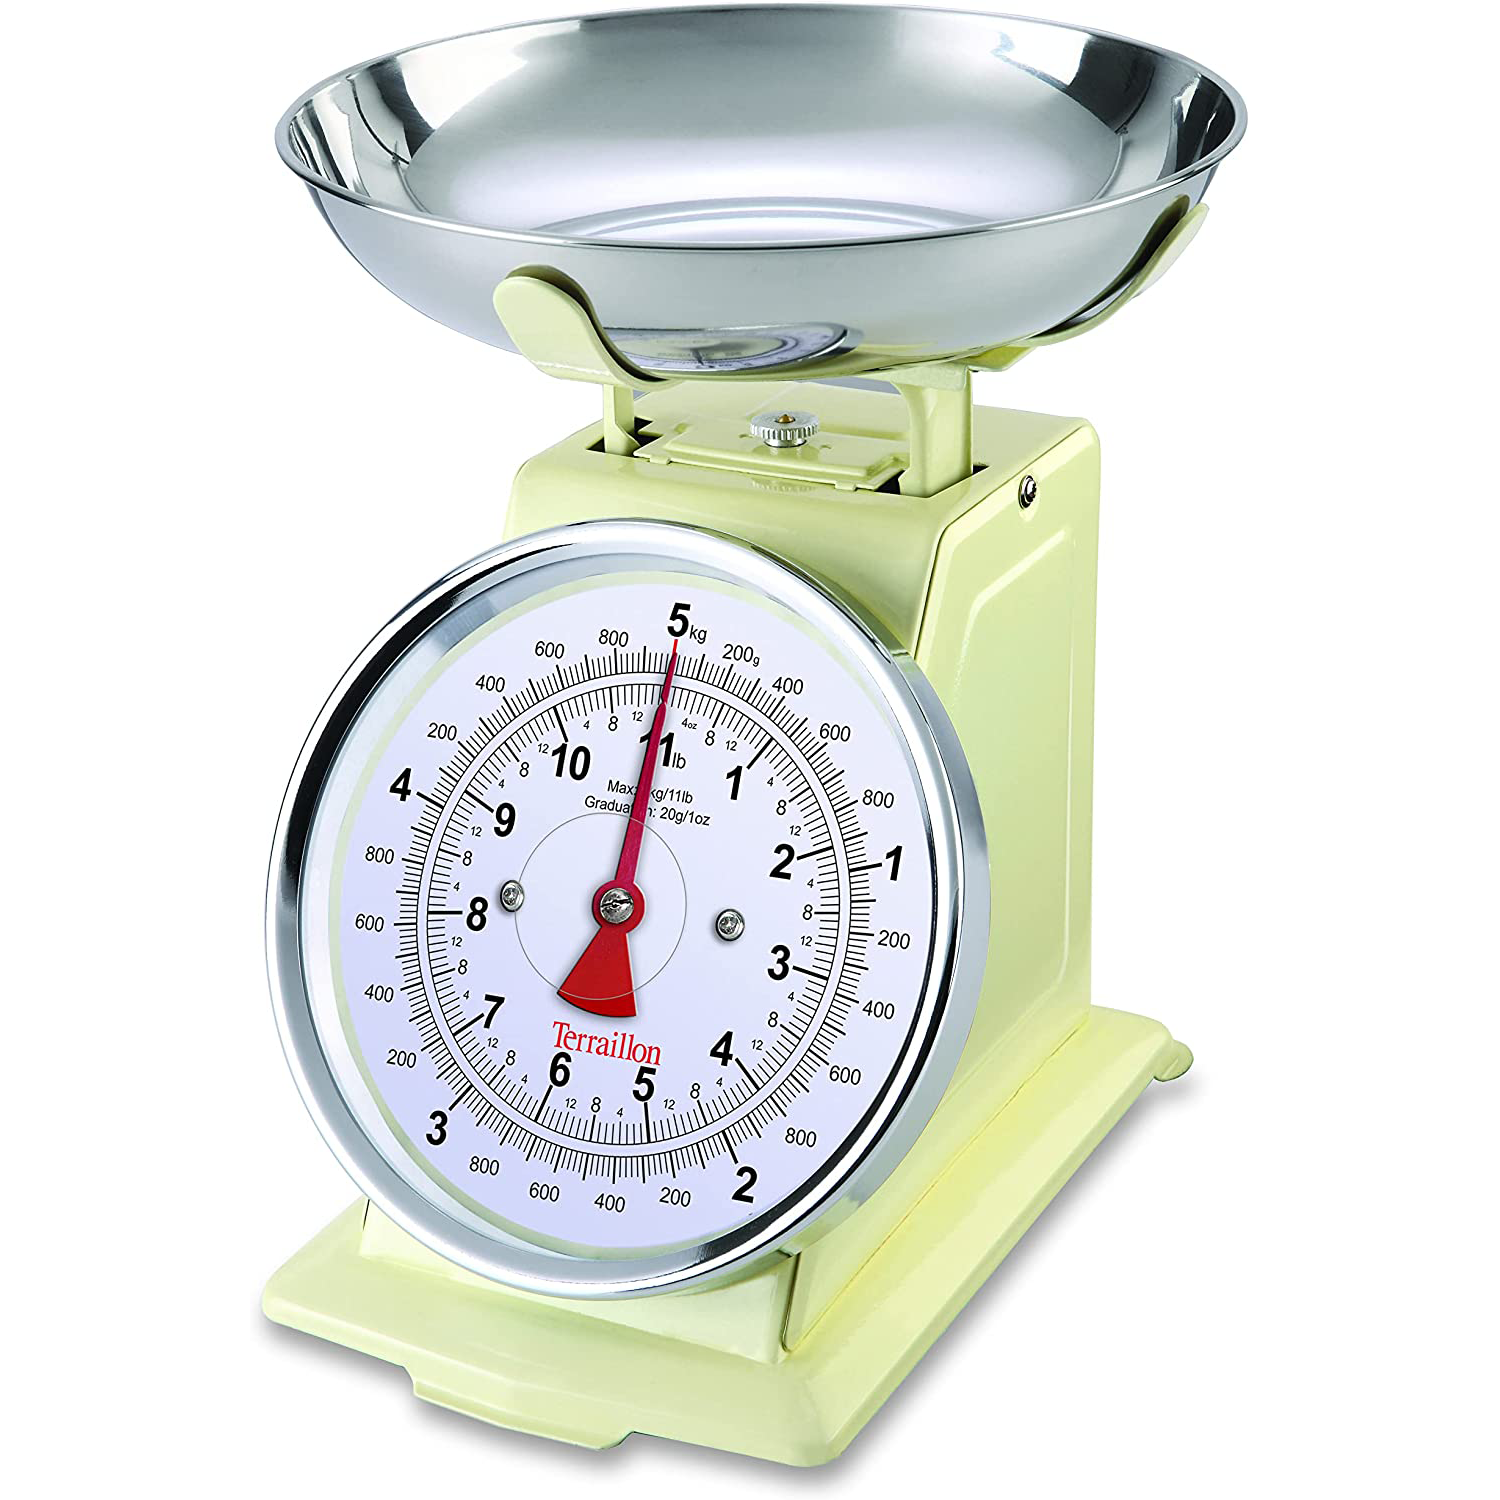 Duronic Kitchen Scales KS5000 Digital Postal Scale 5 KG / 11 LB with Baking  Mixing Bowl | Stainless Steel | Large Display